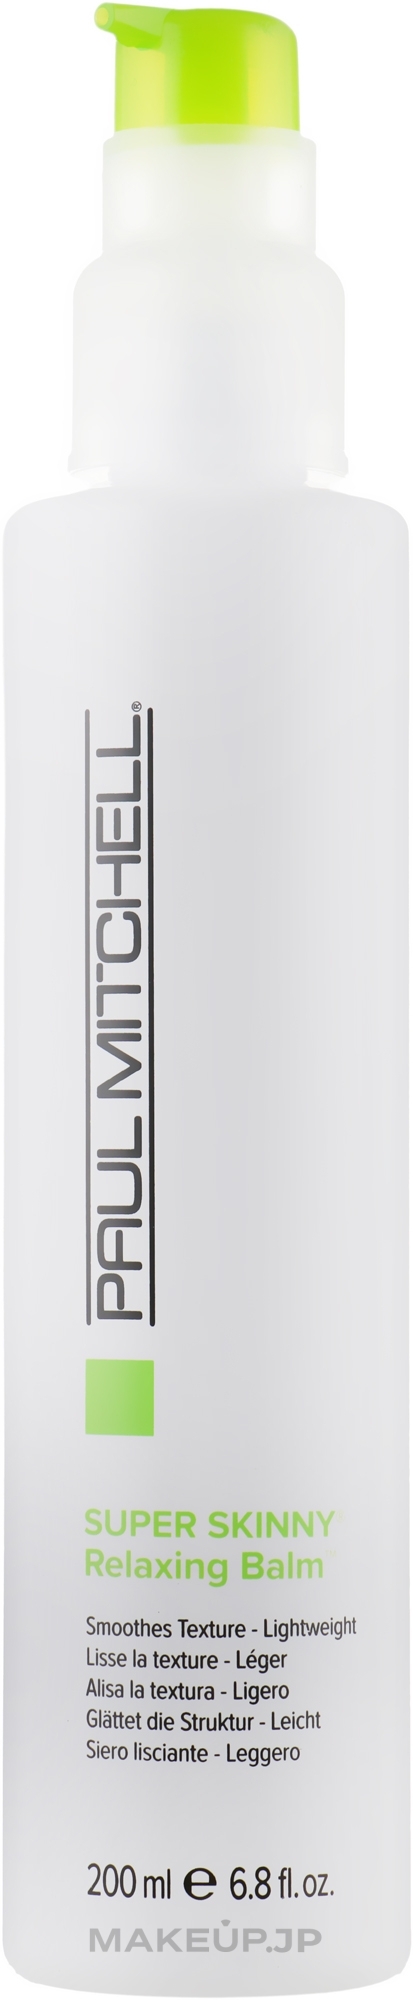 Relaxing Balm for Curly Hair - Paul Mitchell Smoothing Super Skinny Relaxing Balm — photo 200 ml